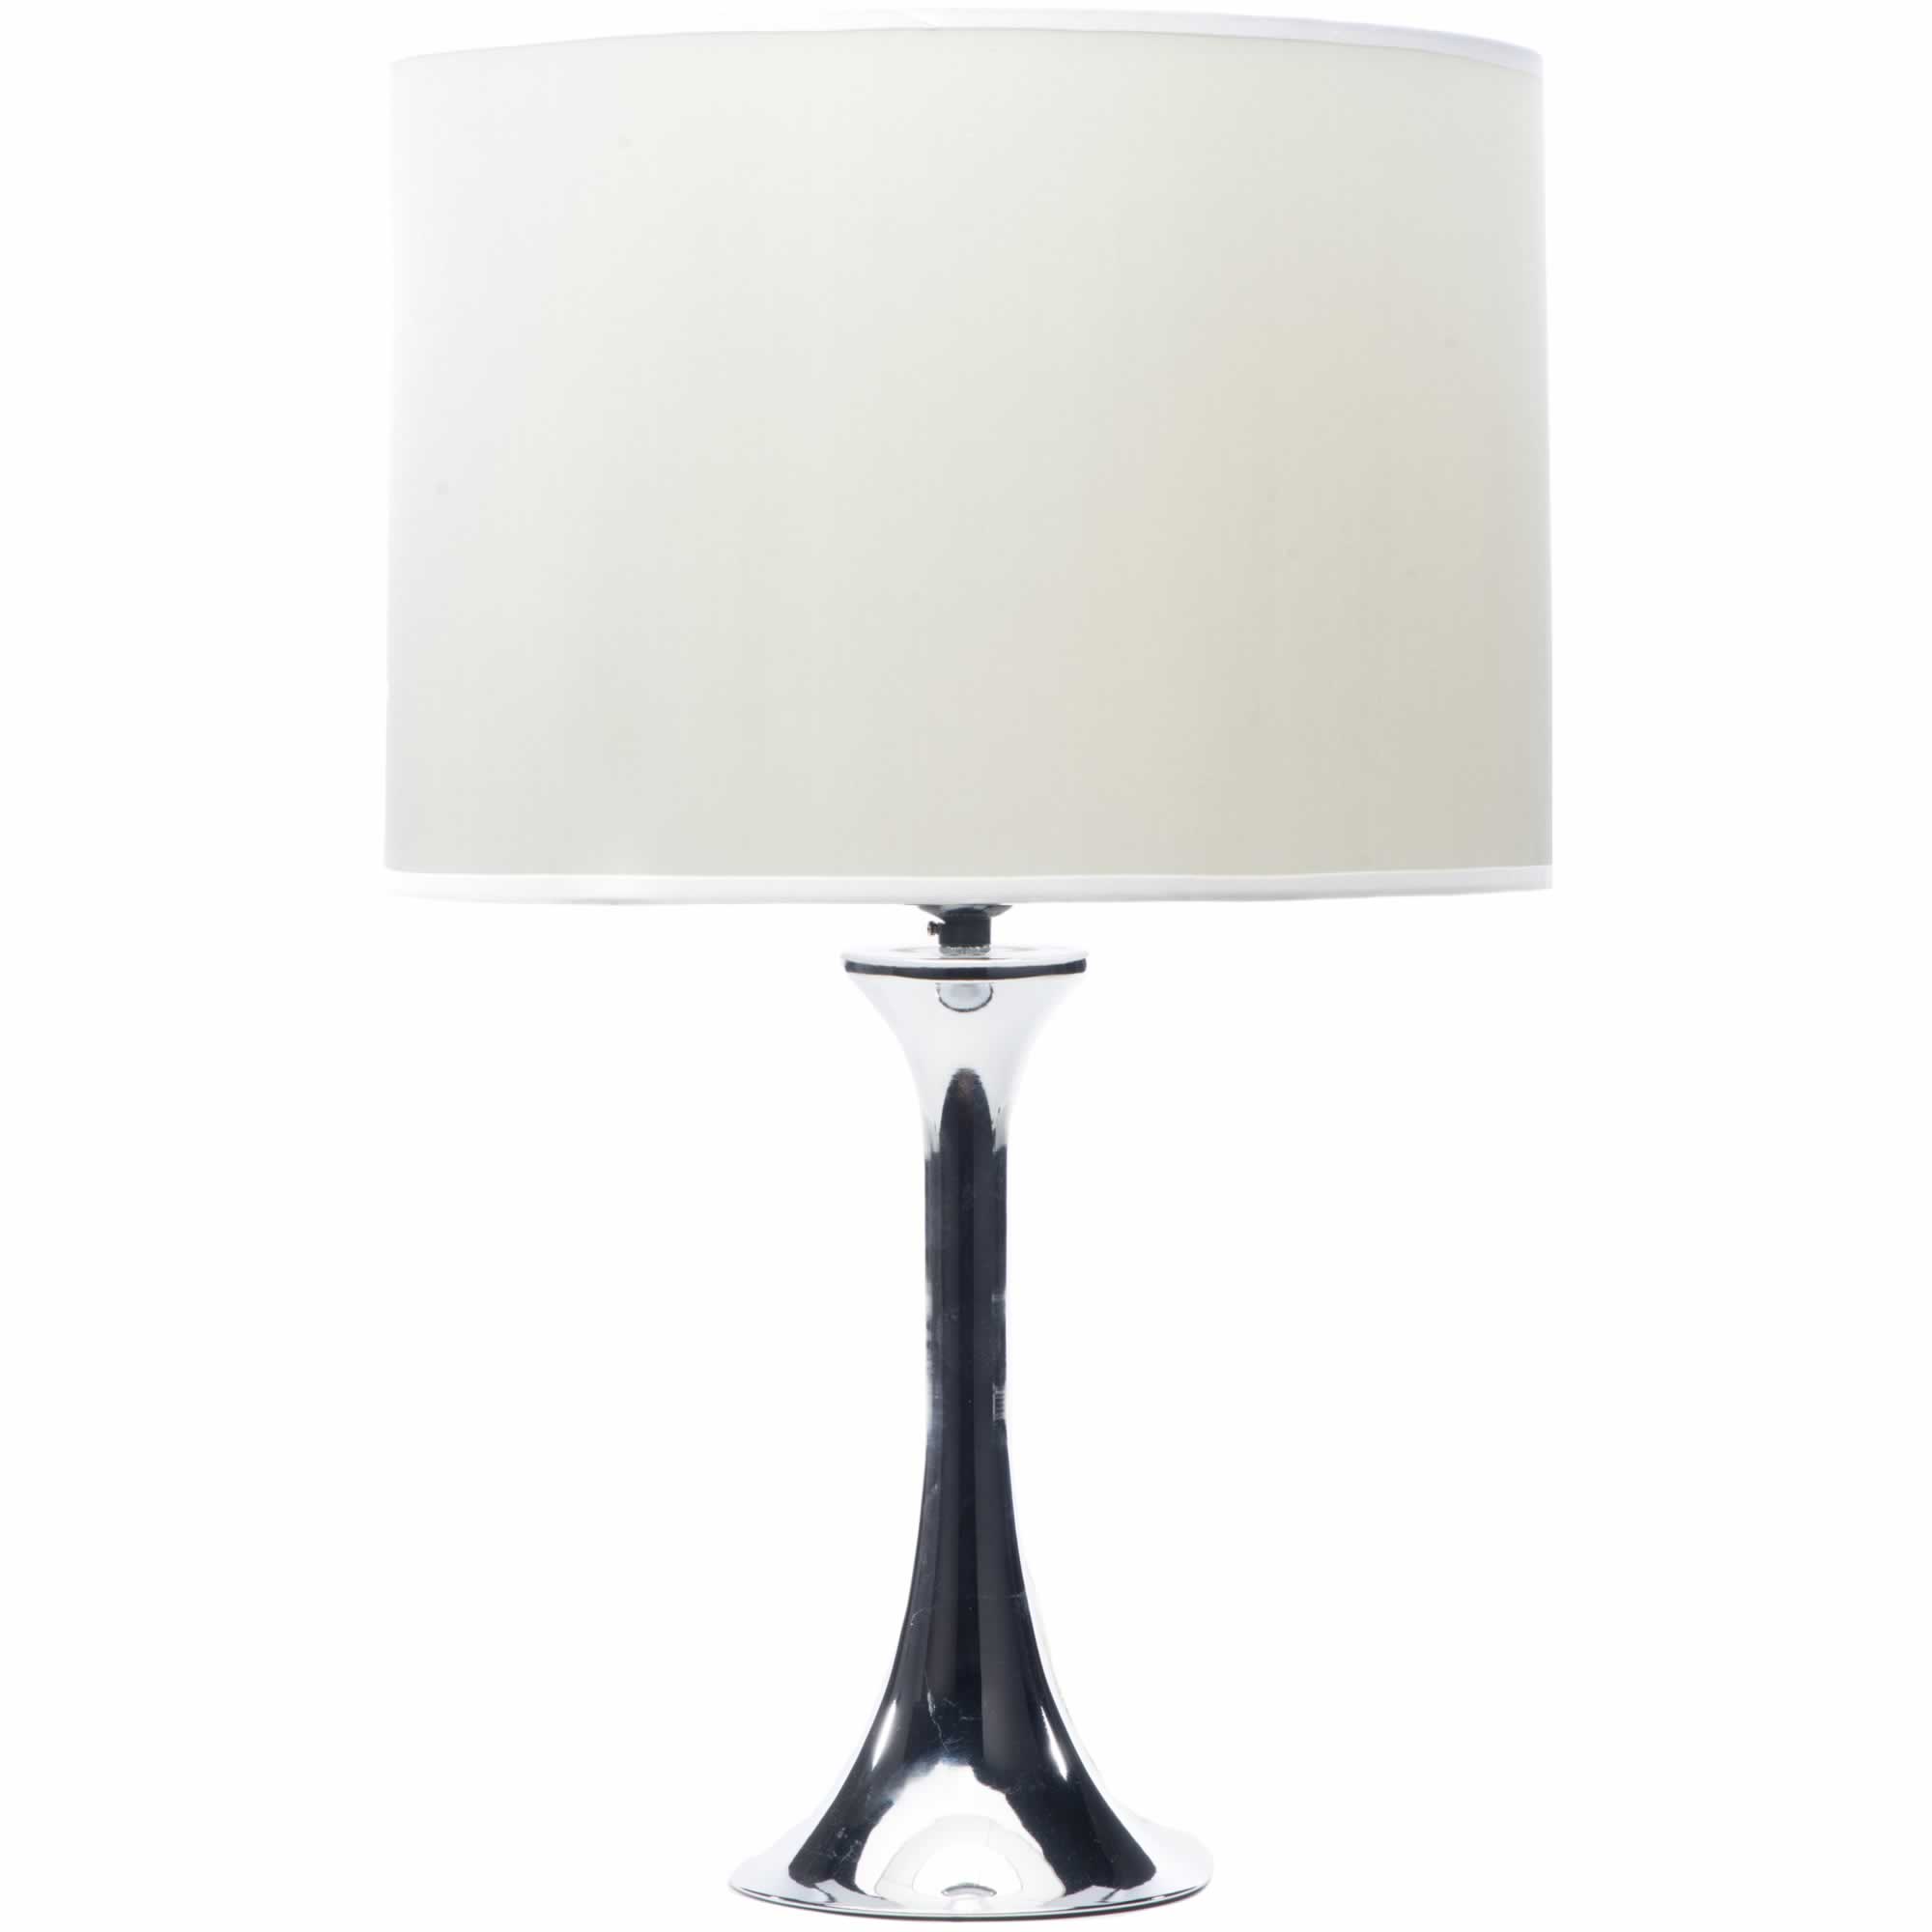 The Silver Bell Table Lamp : SKU TL0004 Contemporary Lamps by Modern Crowd